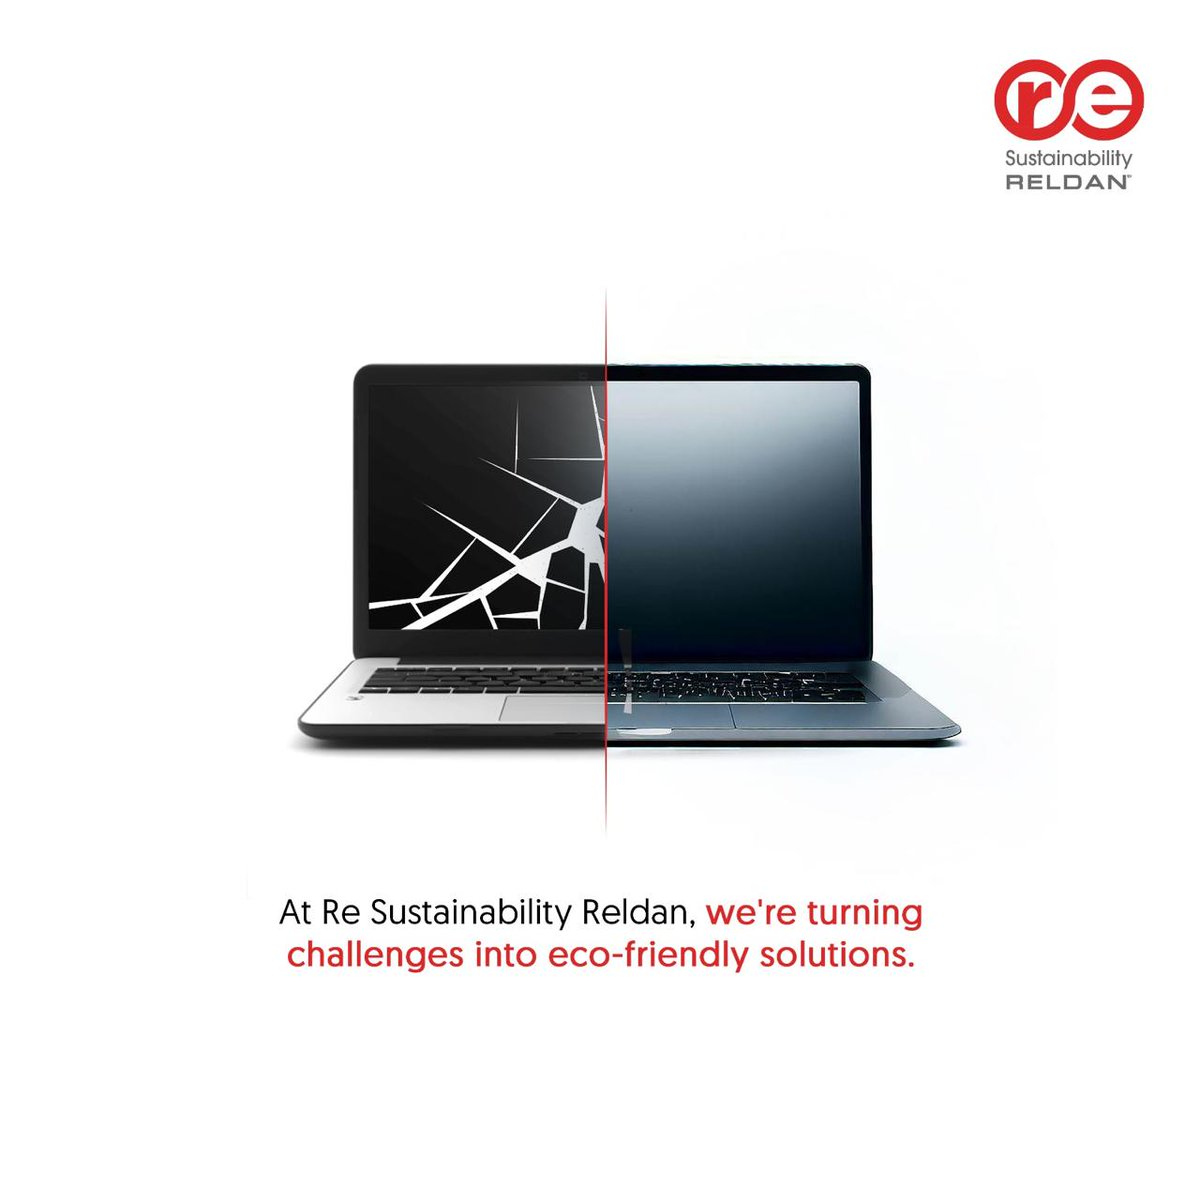 E-waste management is crucial for the environment. Re Sustainability Reldan leads with eco-friendly solutions, saving resources and cutting emissions. Join us for a greener future! Learn more at rereldan.com. #EwasteRecycling #Sustainability #GreenFuture